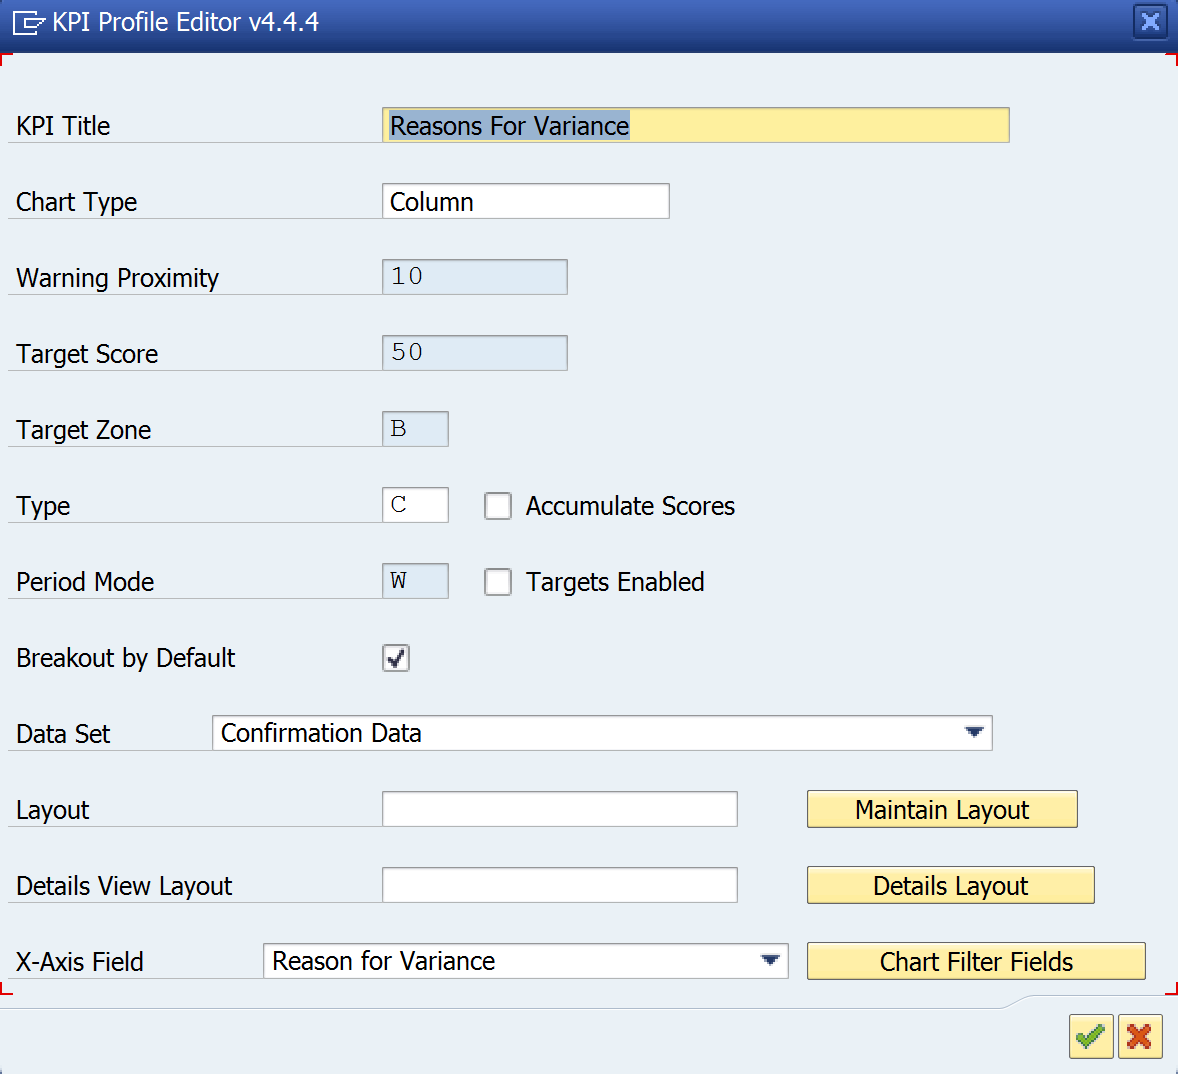 Reasons for variance in KPI profile editor